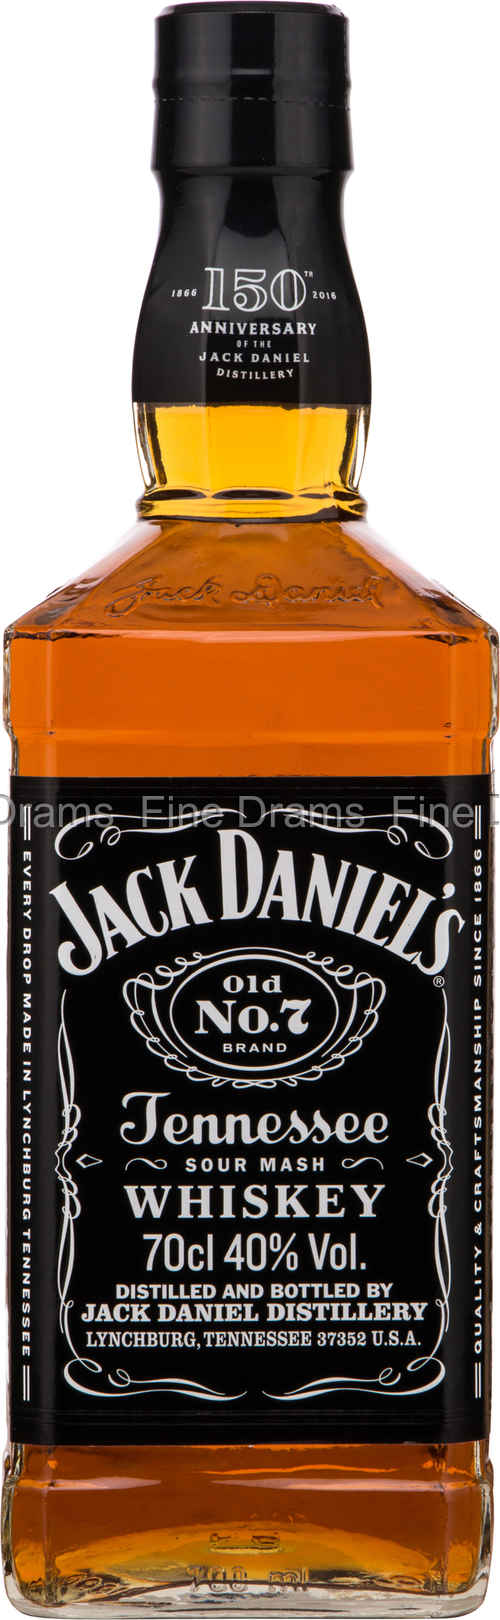 Jack Daniel's Old No.7 Tennessee Whisky